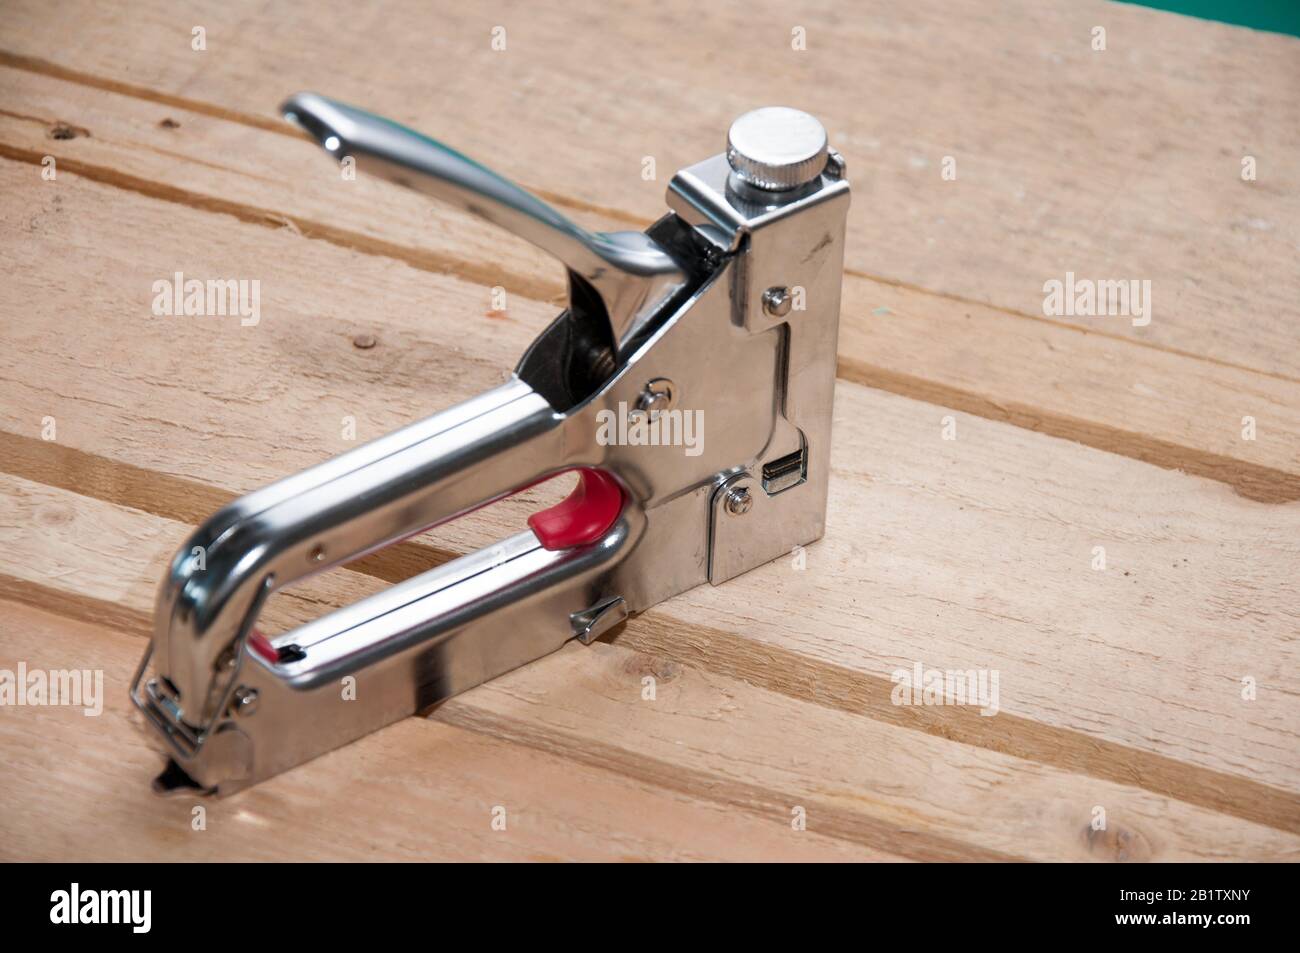 Carpenter Using an Industrial Construction Stapler on a Wood Plank Stock  Photo - Image of furniture, construction: 215806820